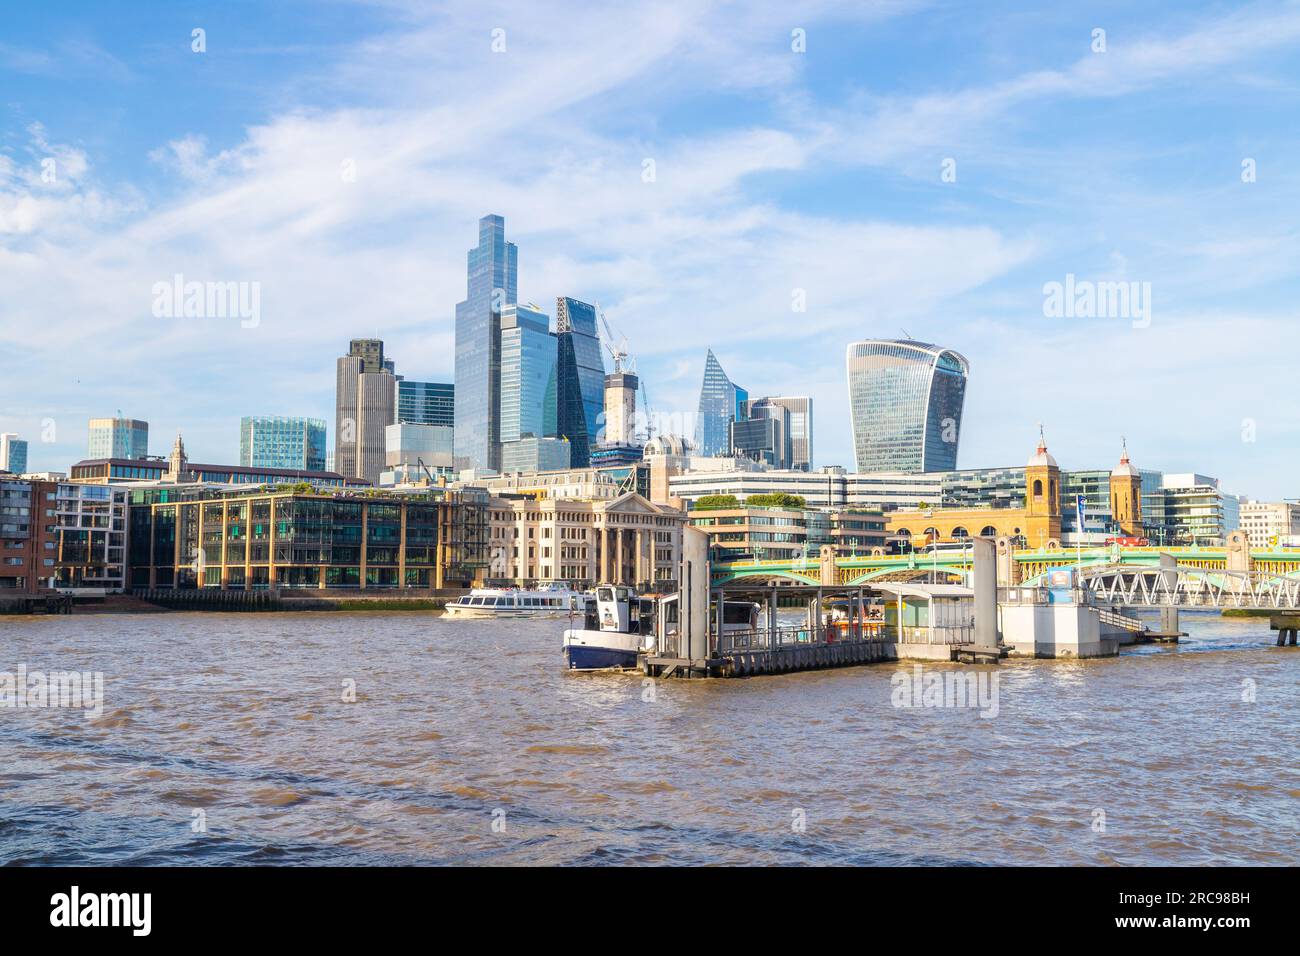 LONDON, UK - 6TH JULY 2023: Bankside Pier and the City of London cityscape during the day. Buildings, boats and people can be seen. Stock Photo